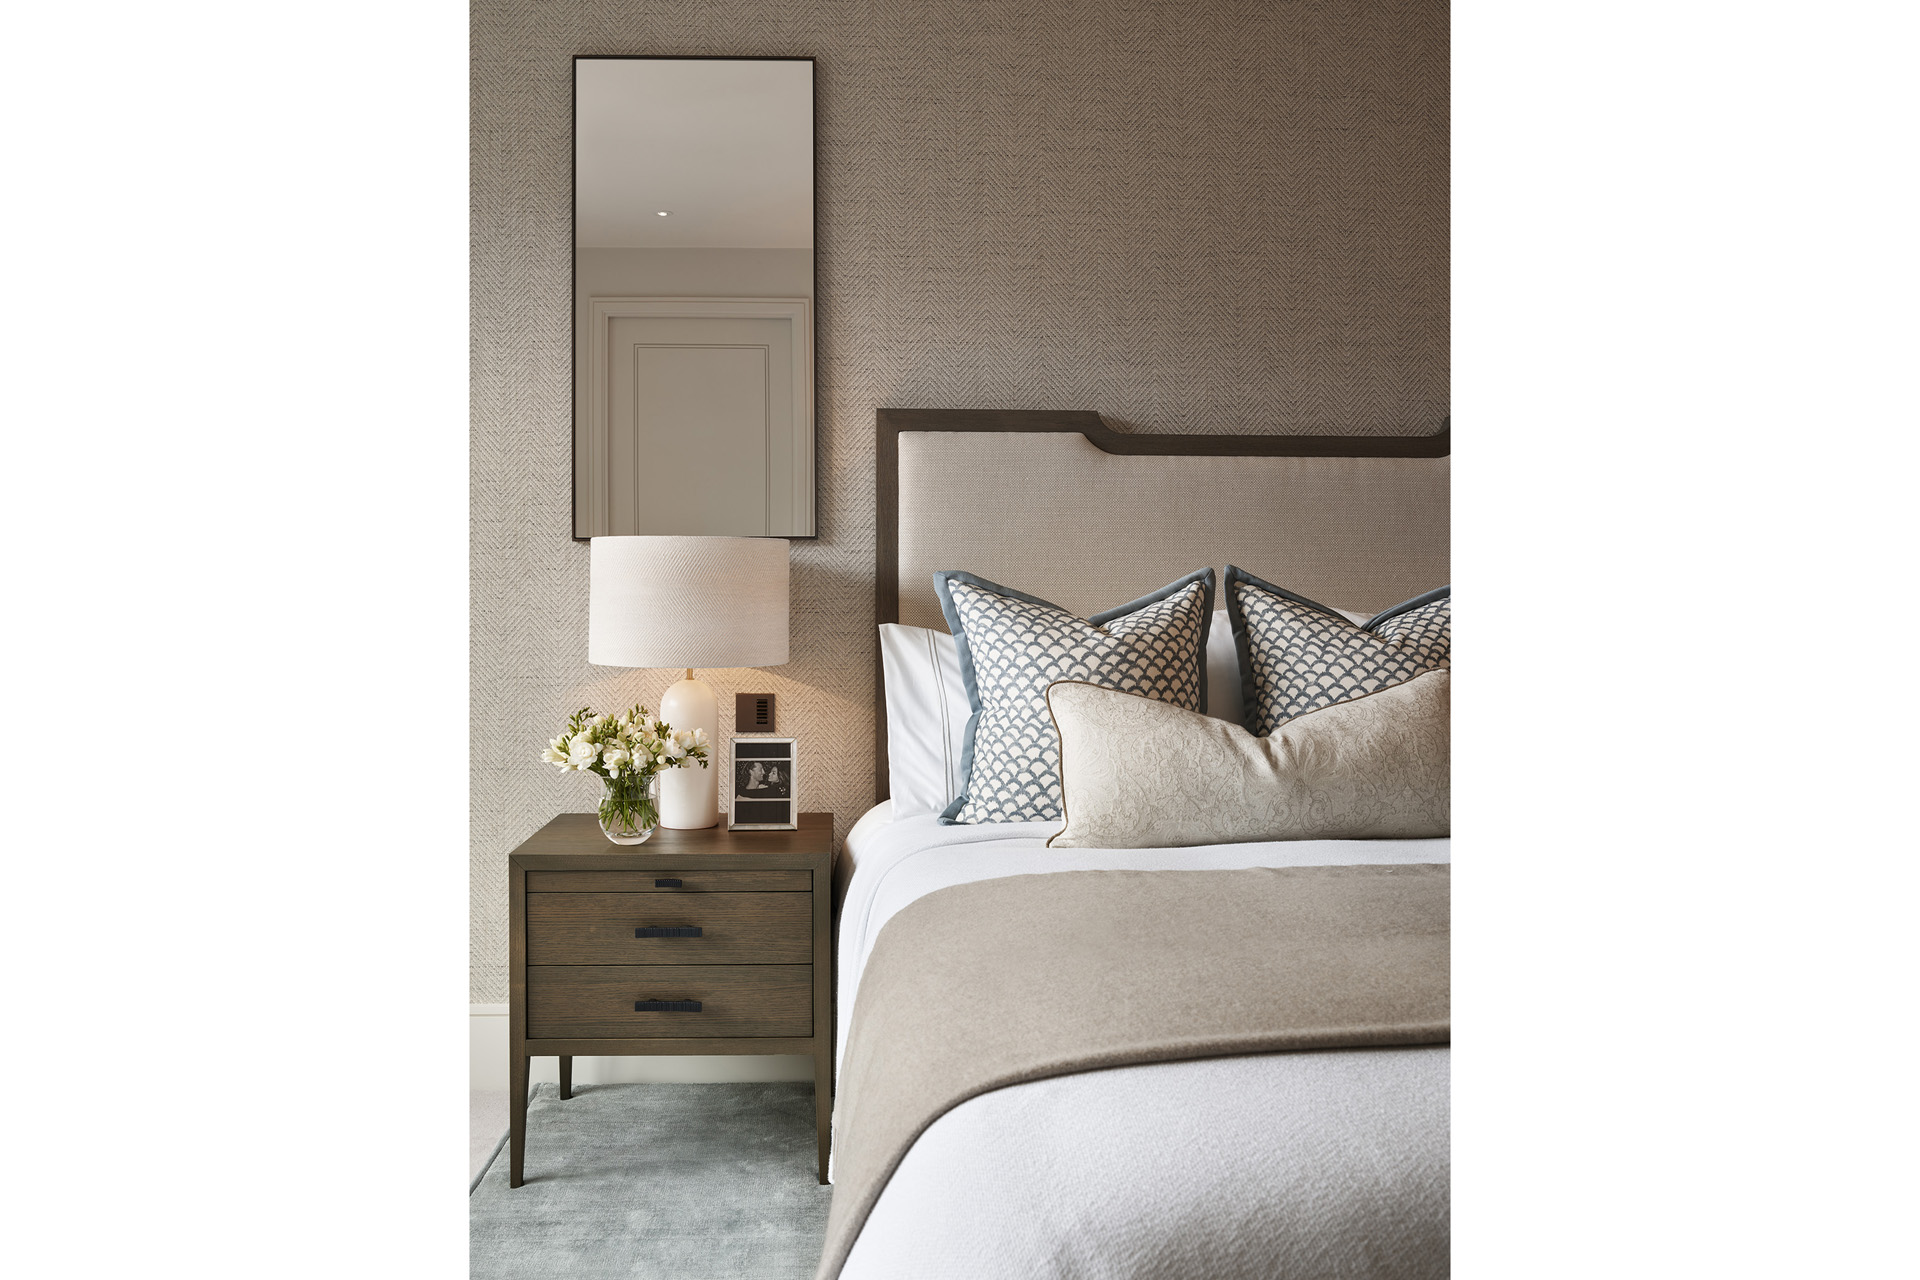 A bedroom with a bed, side table and mirror